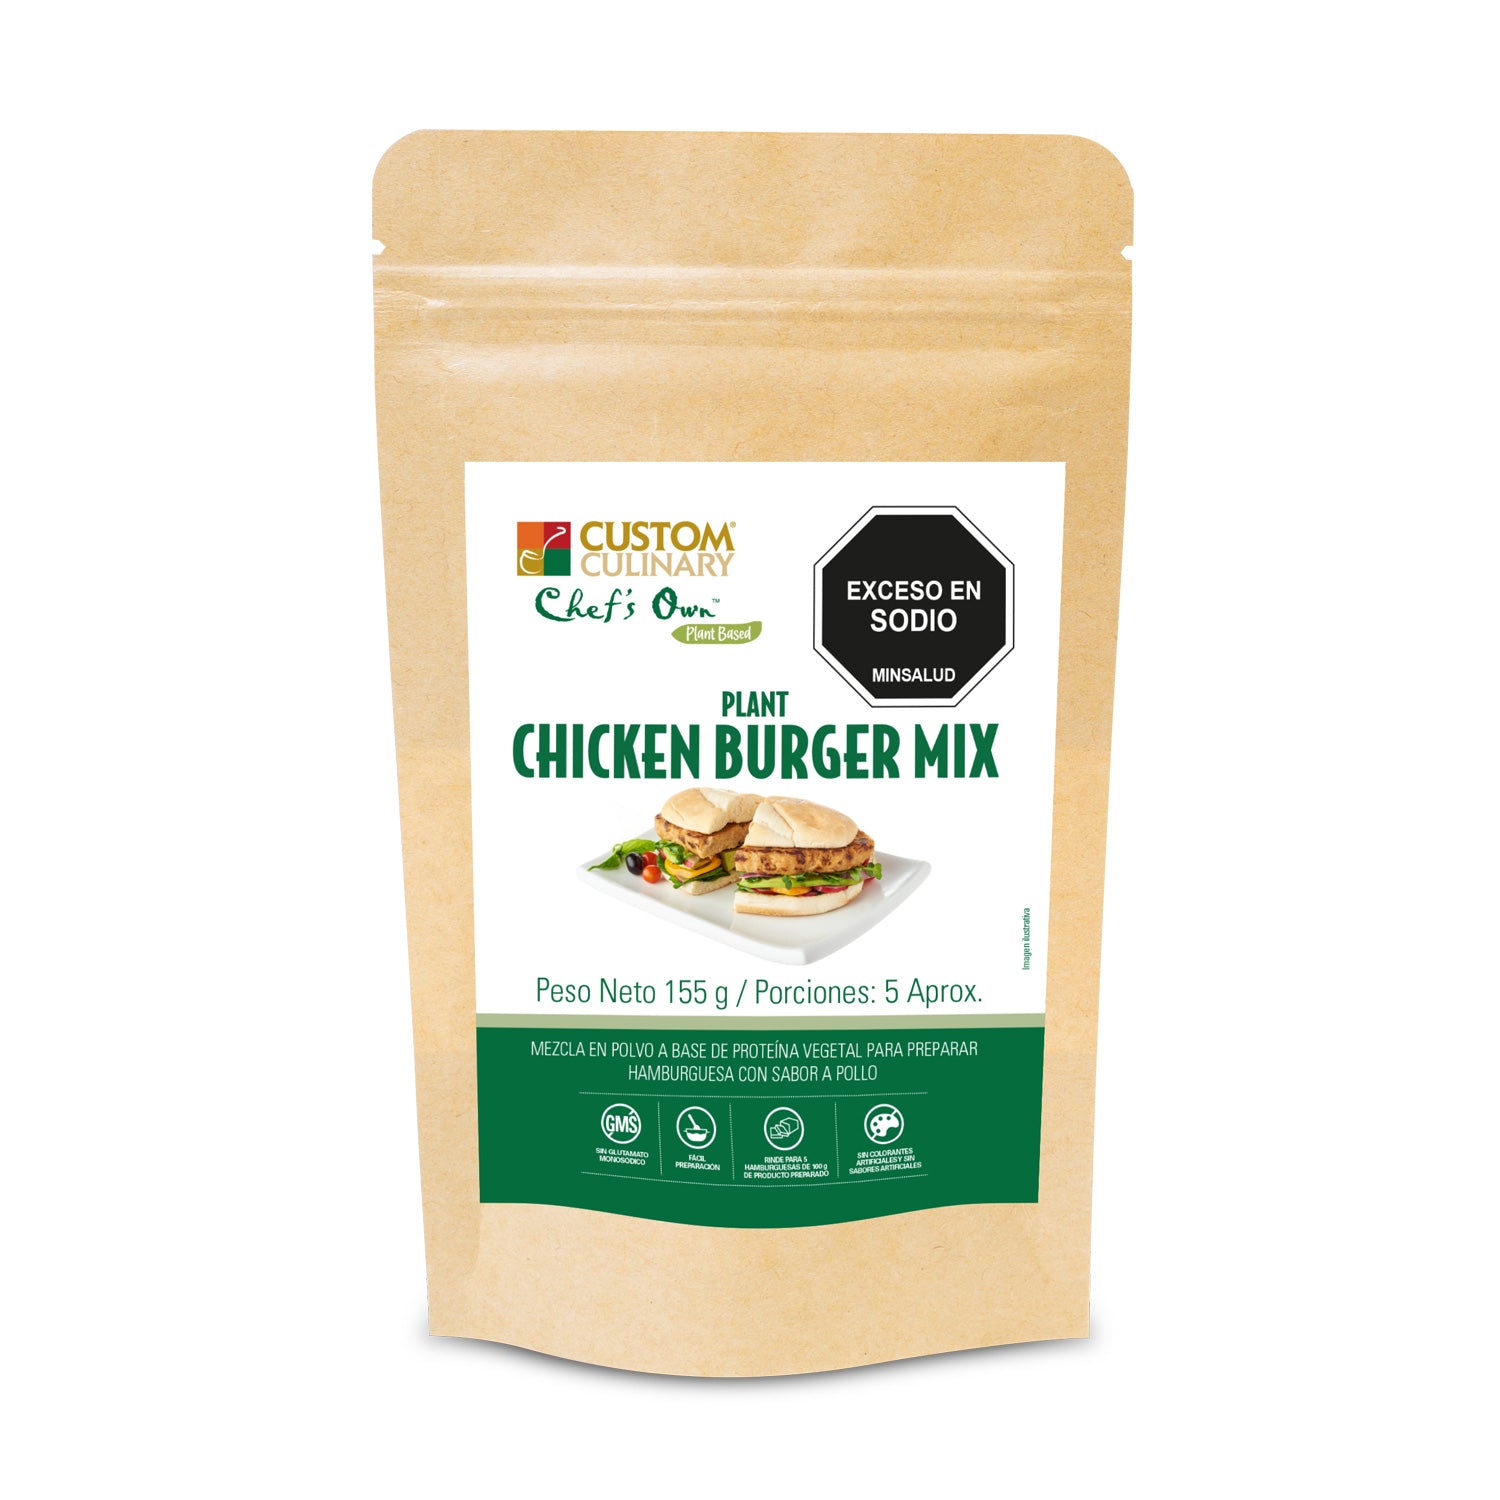 Plant Chicken Burger Mix Chef's Own™ Doypack Zipper Eco 155g